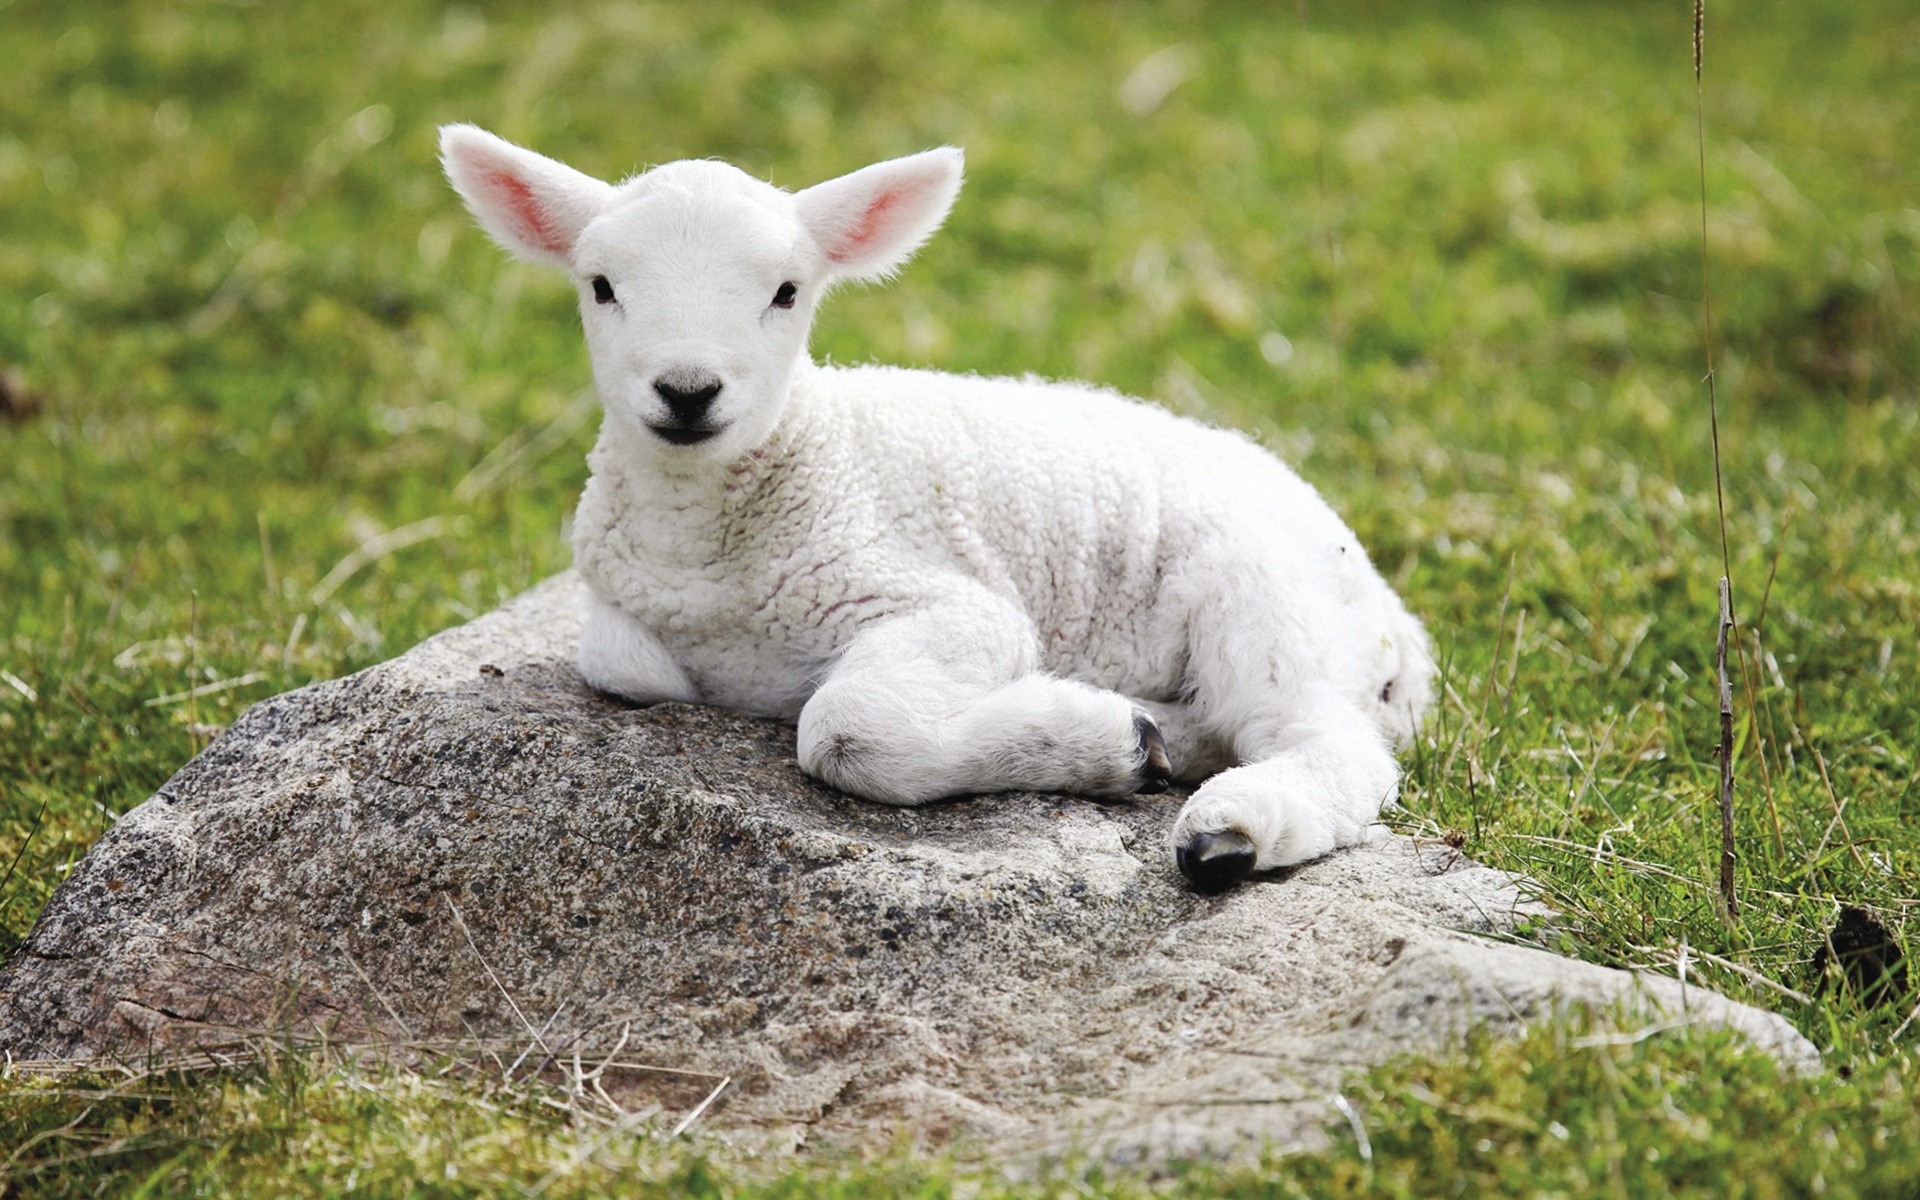 Baby Sheep Sitting Photos HD Wallpaper Image Pictures